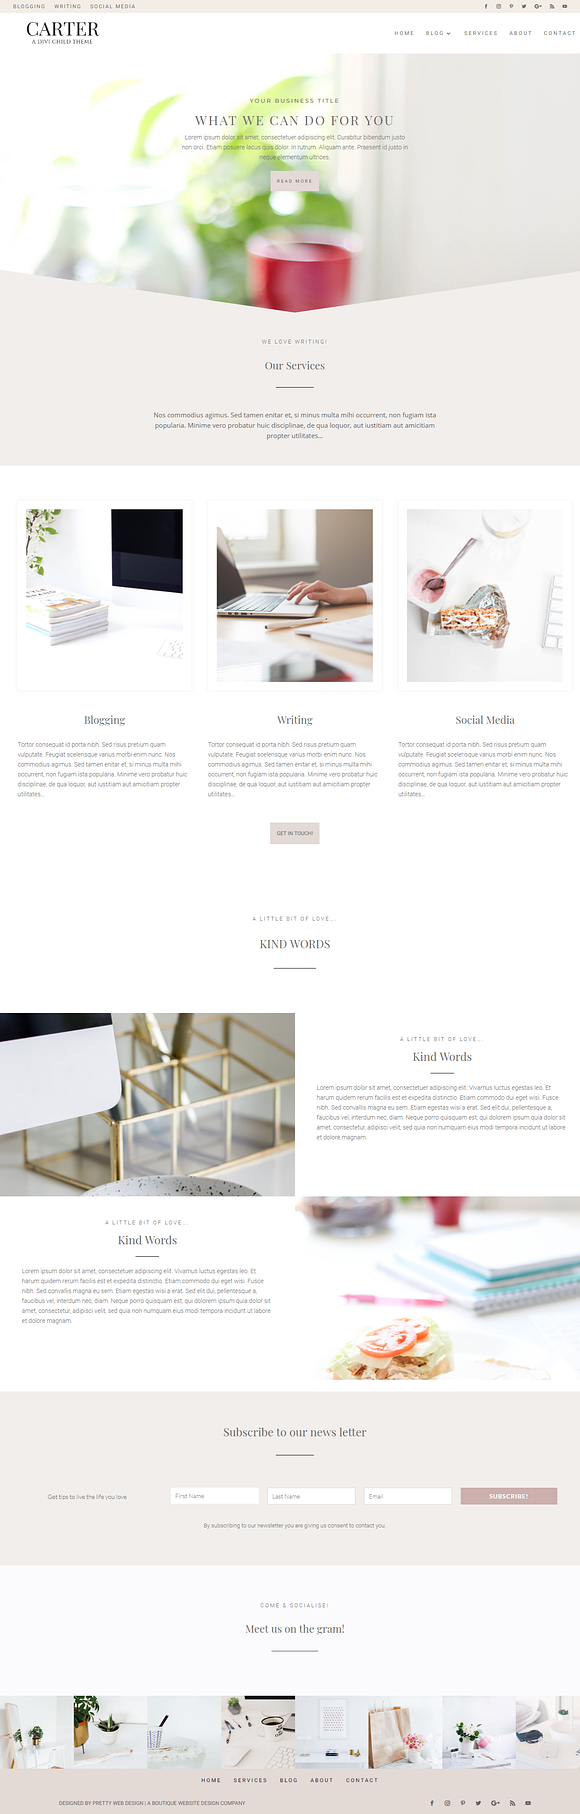 Carter - Divi Child WordPress Theme in WordPress Business Themes - product preview 3